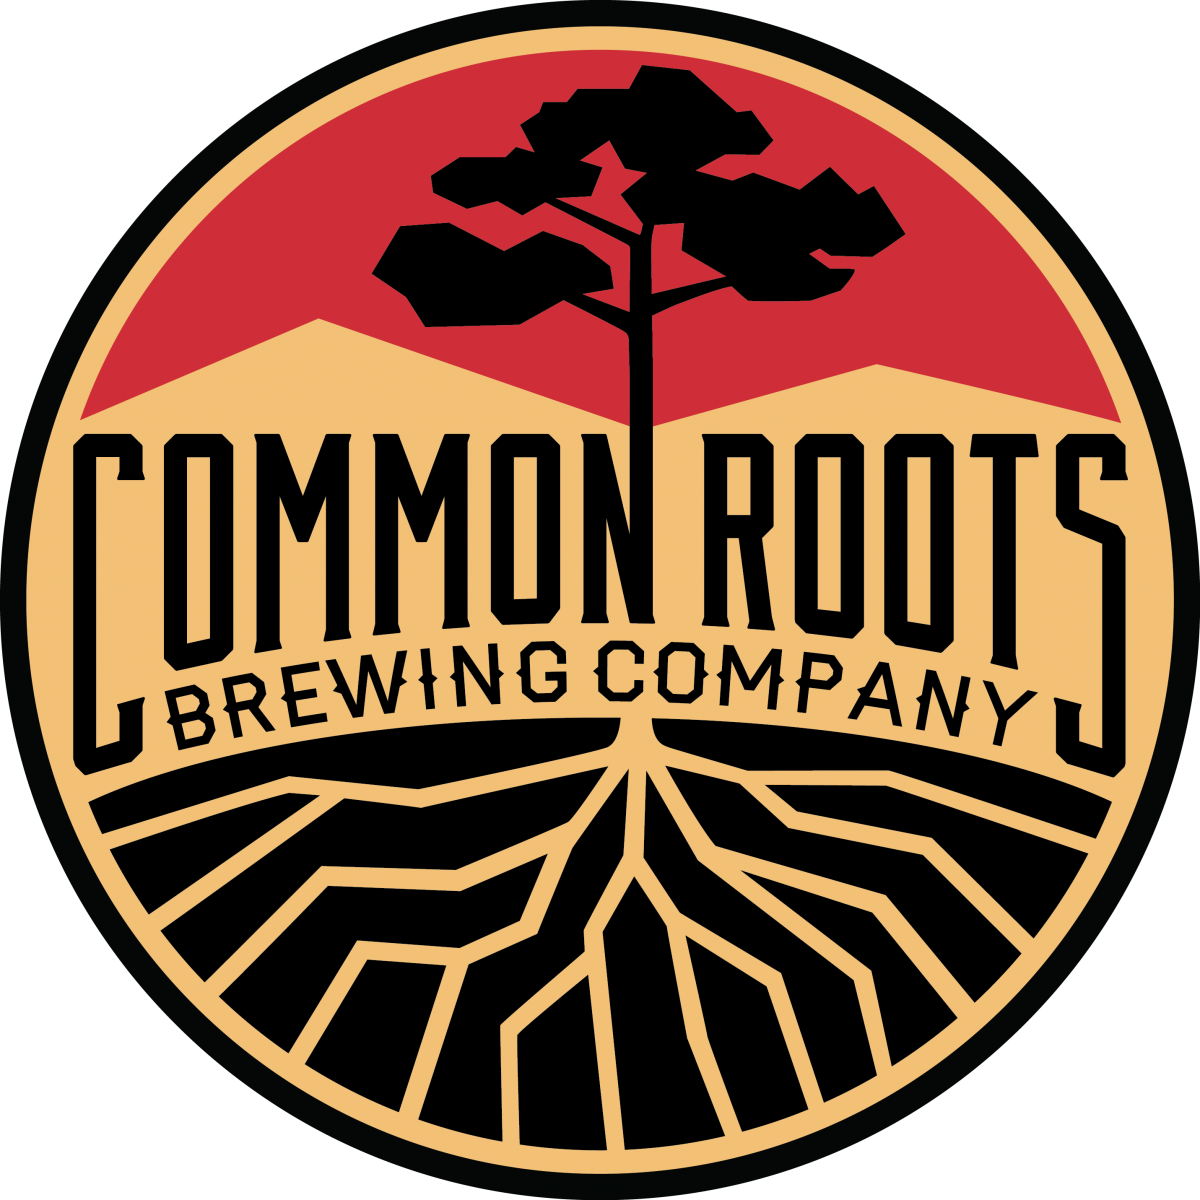 Fitness and Beer Work Together at Common Roots Brewing Company